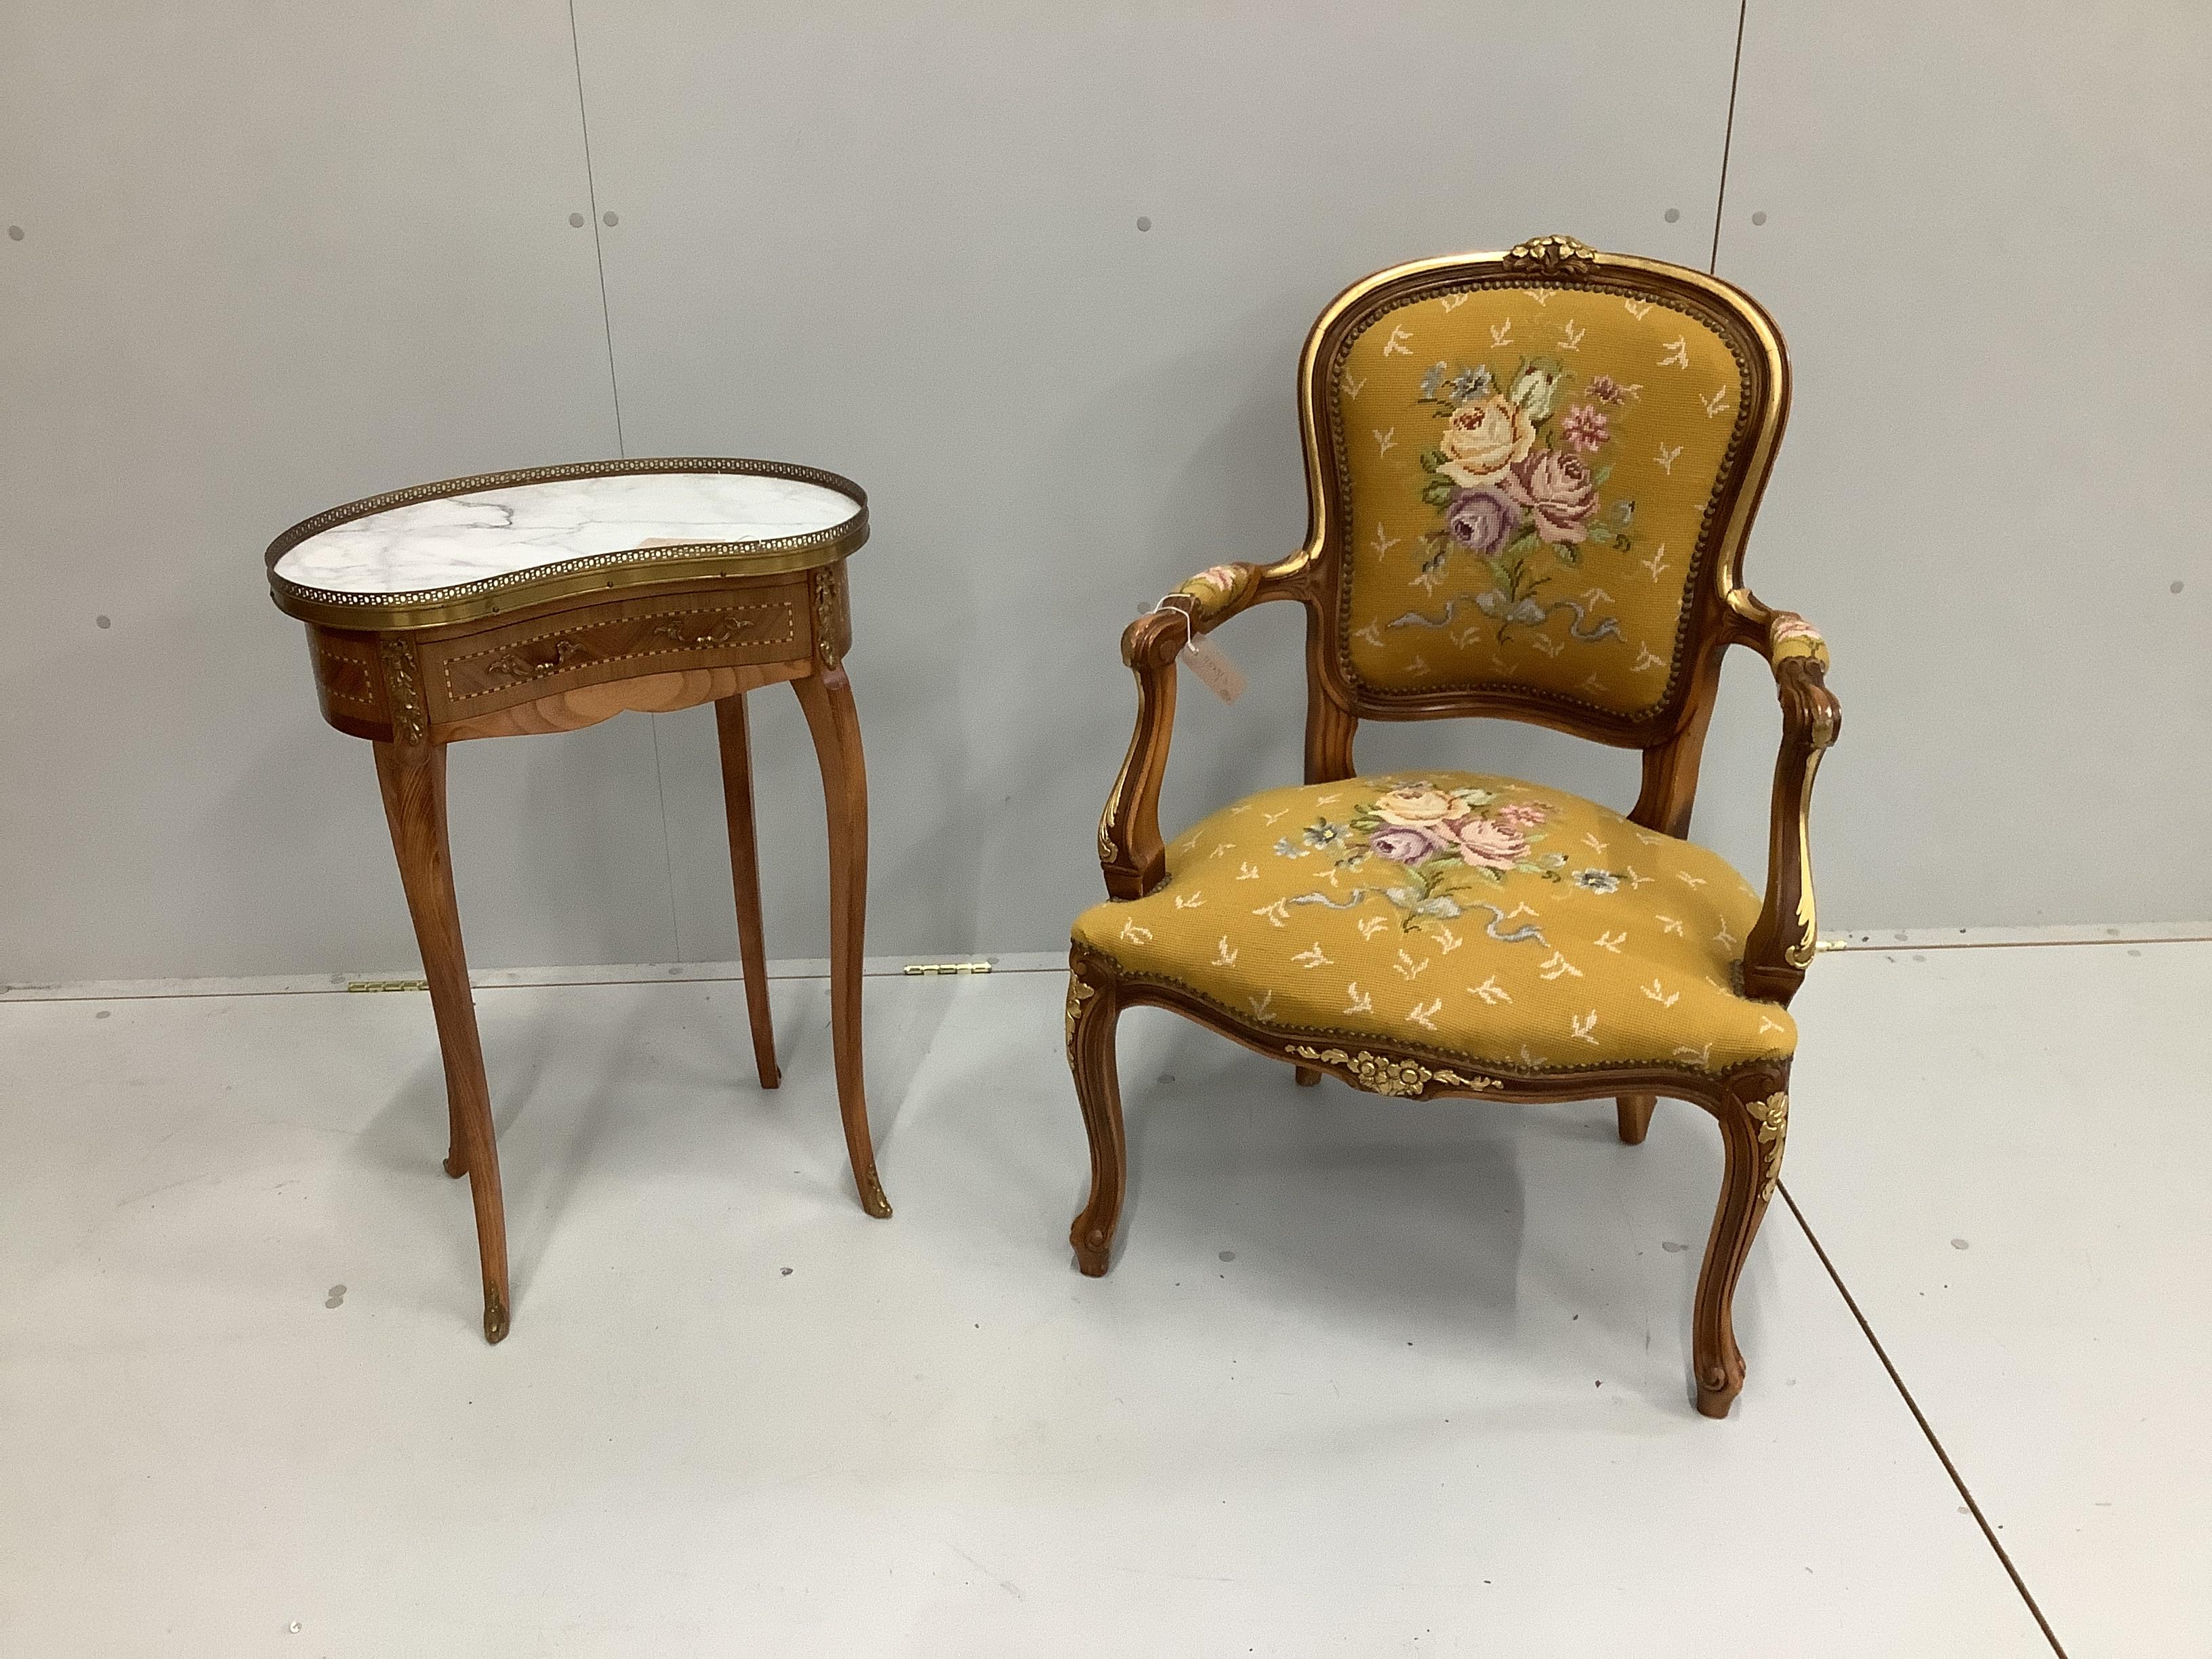 A reproduction Louis XV style gueridon, with inlaid decoration, marble top and gilt metal mounts, width 51cm, depth 32cm, height 74cm together with a Louis XV style fauteuil with floral needlework seat and back          